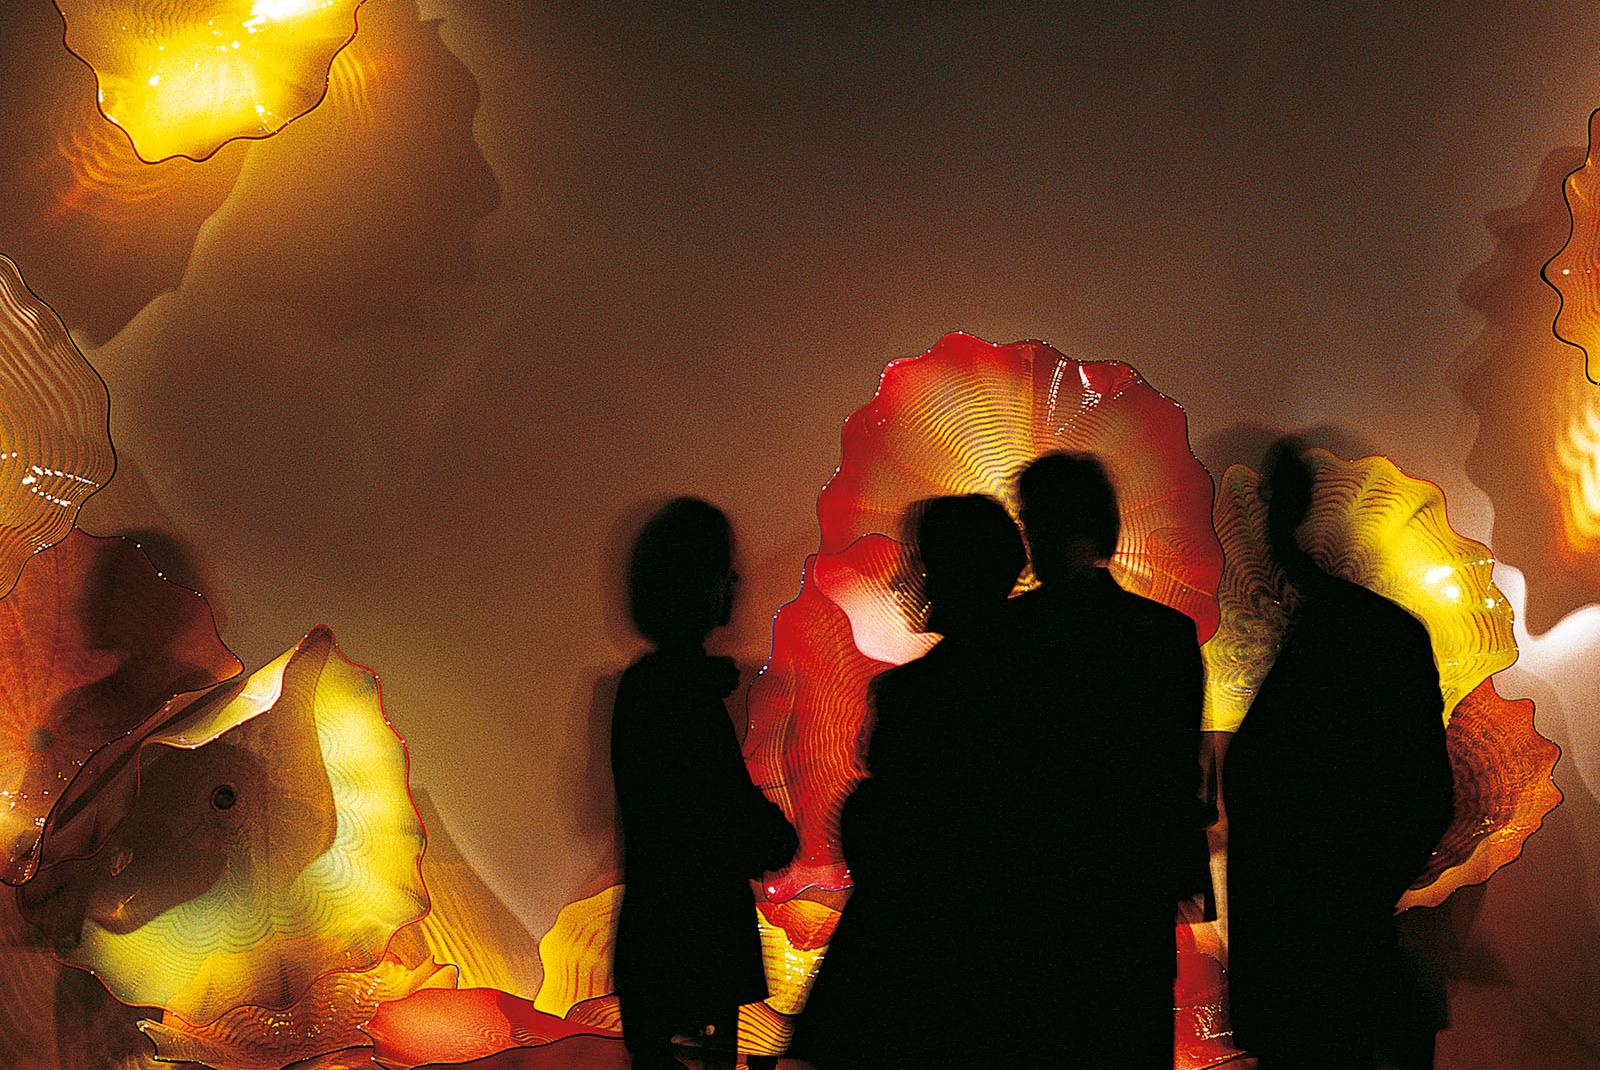 Dale Chihuly, Autumn Gold Persian Wall, 2002